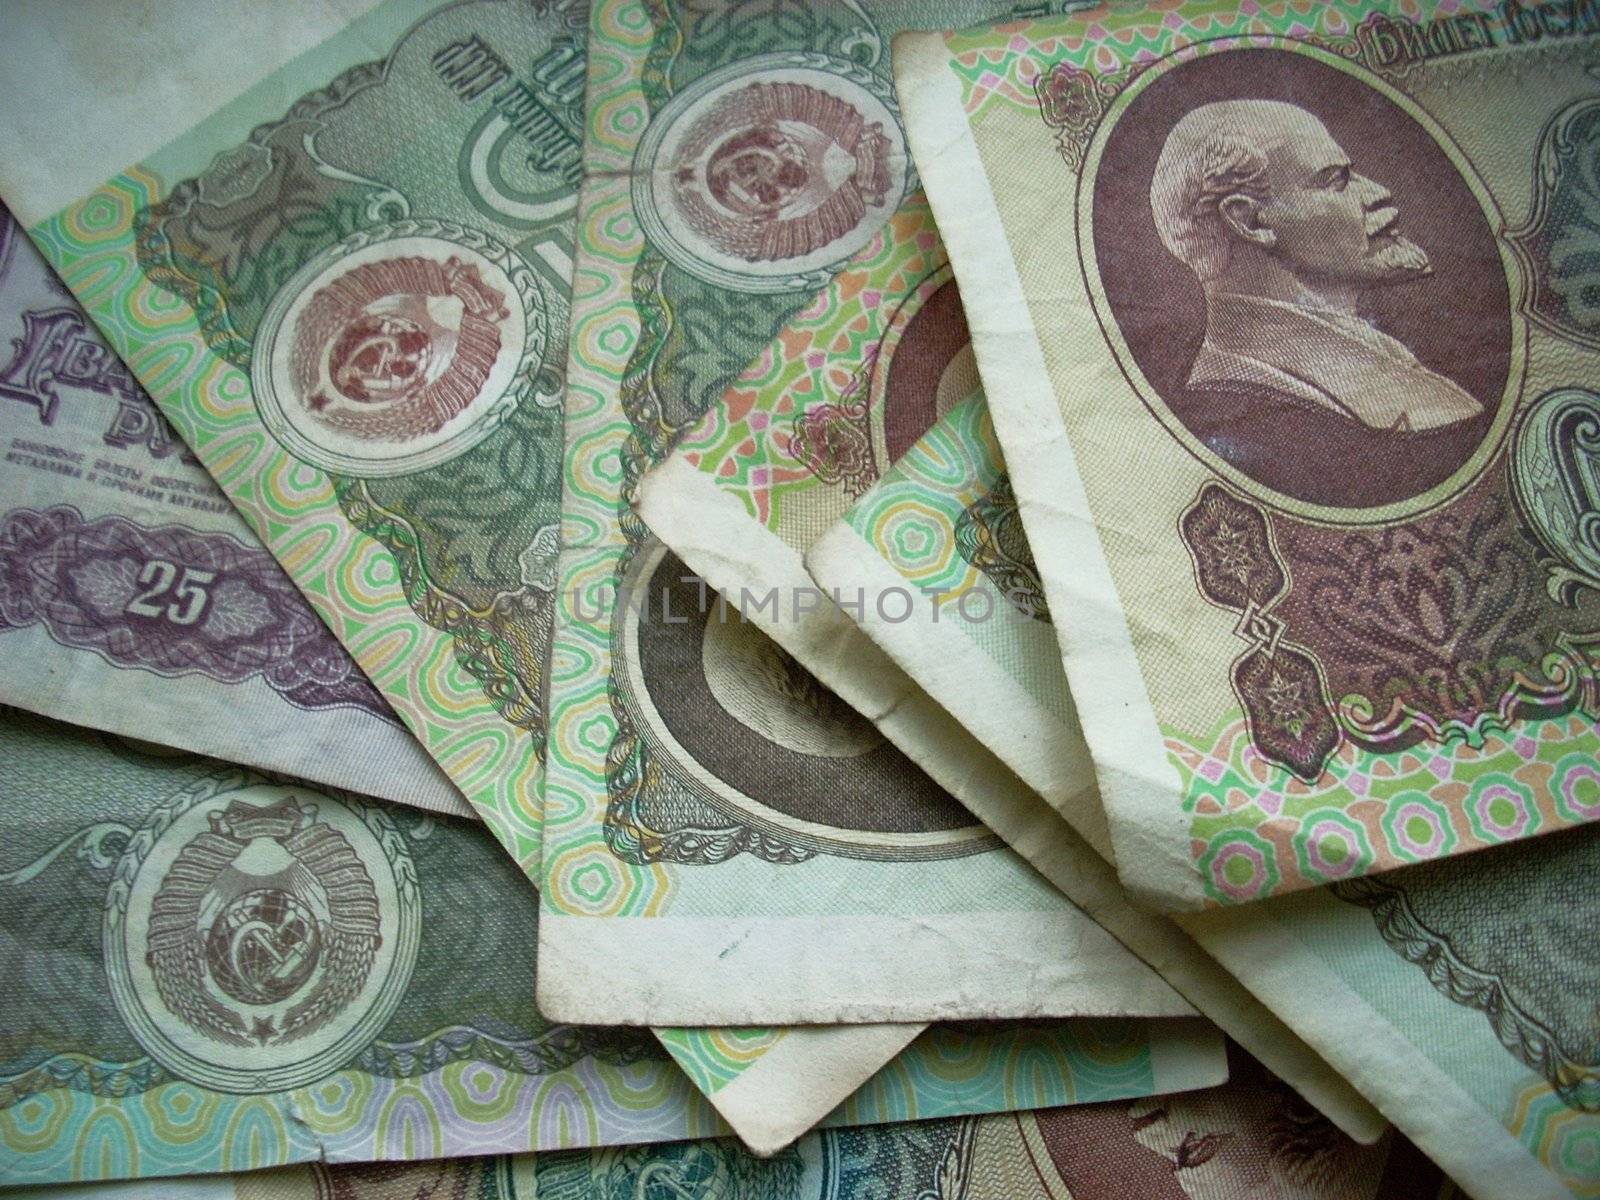 These are some retro soviet banknotes. Many years ago it was a very big treasure….